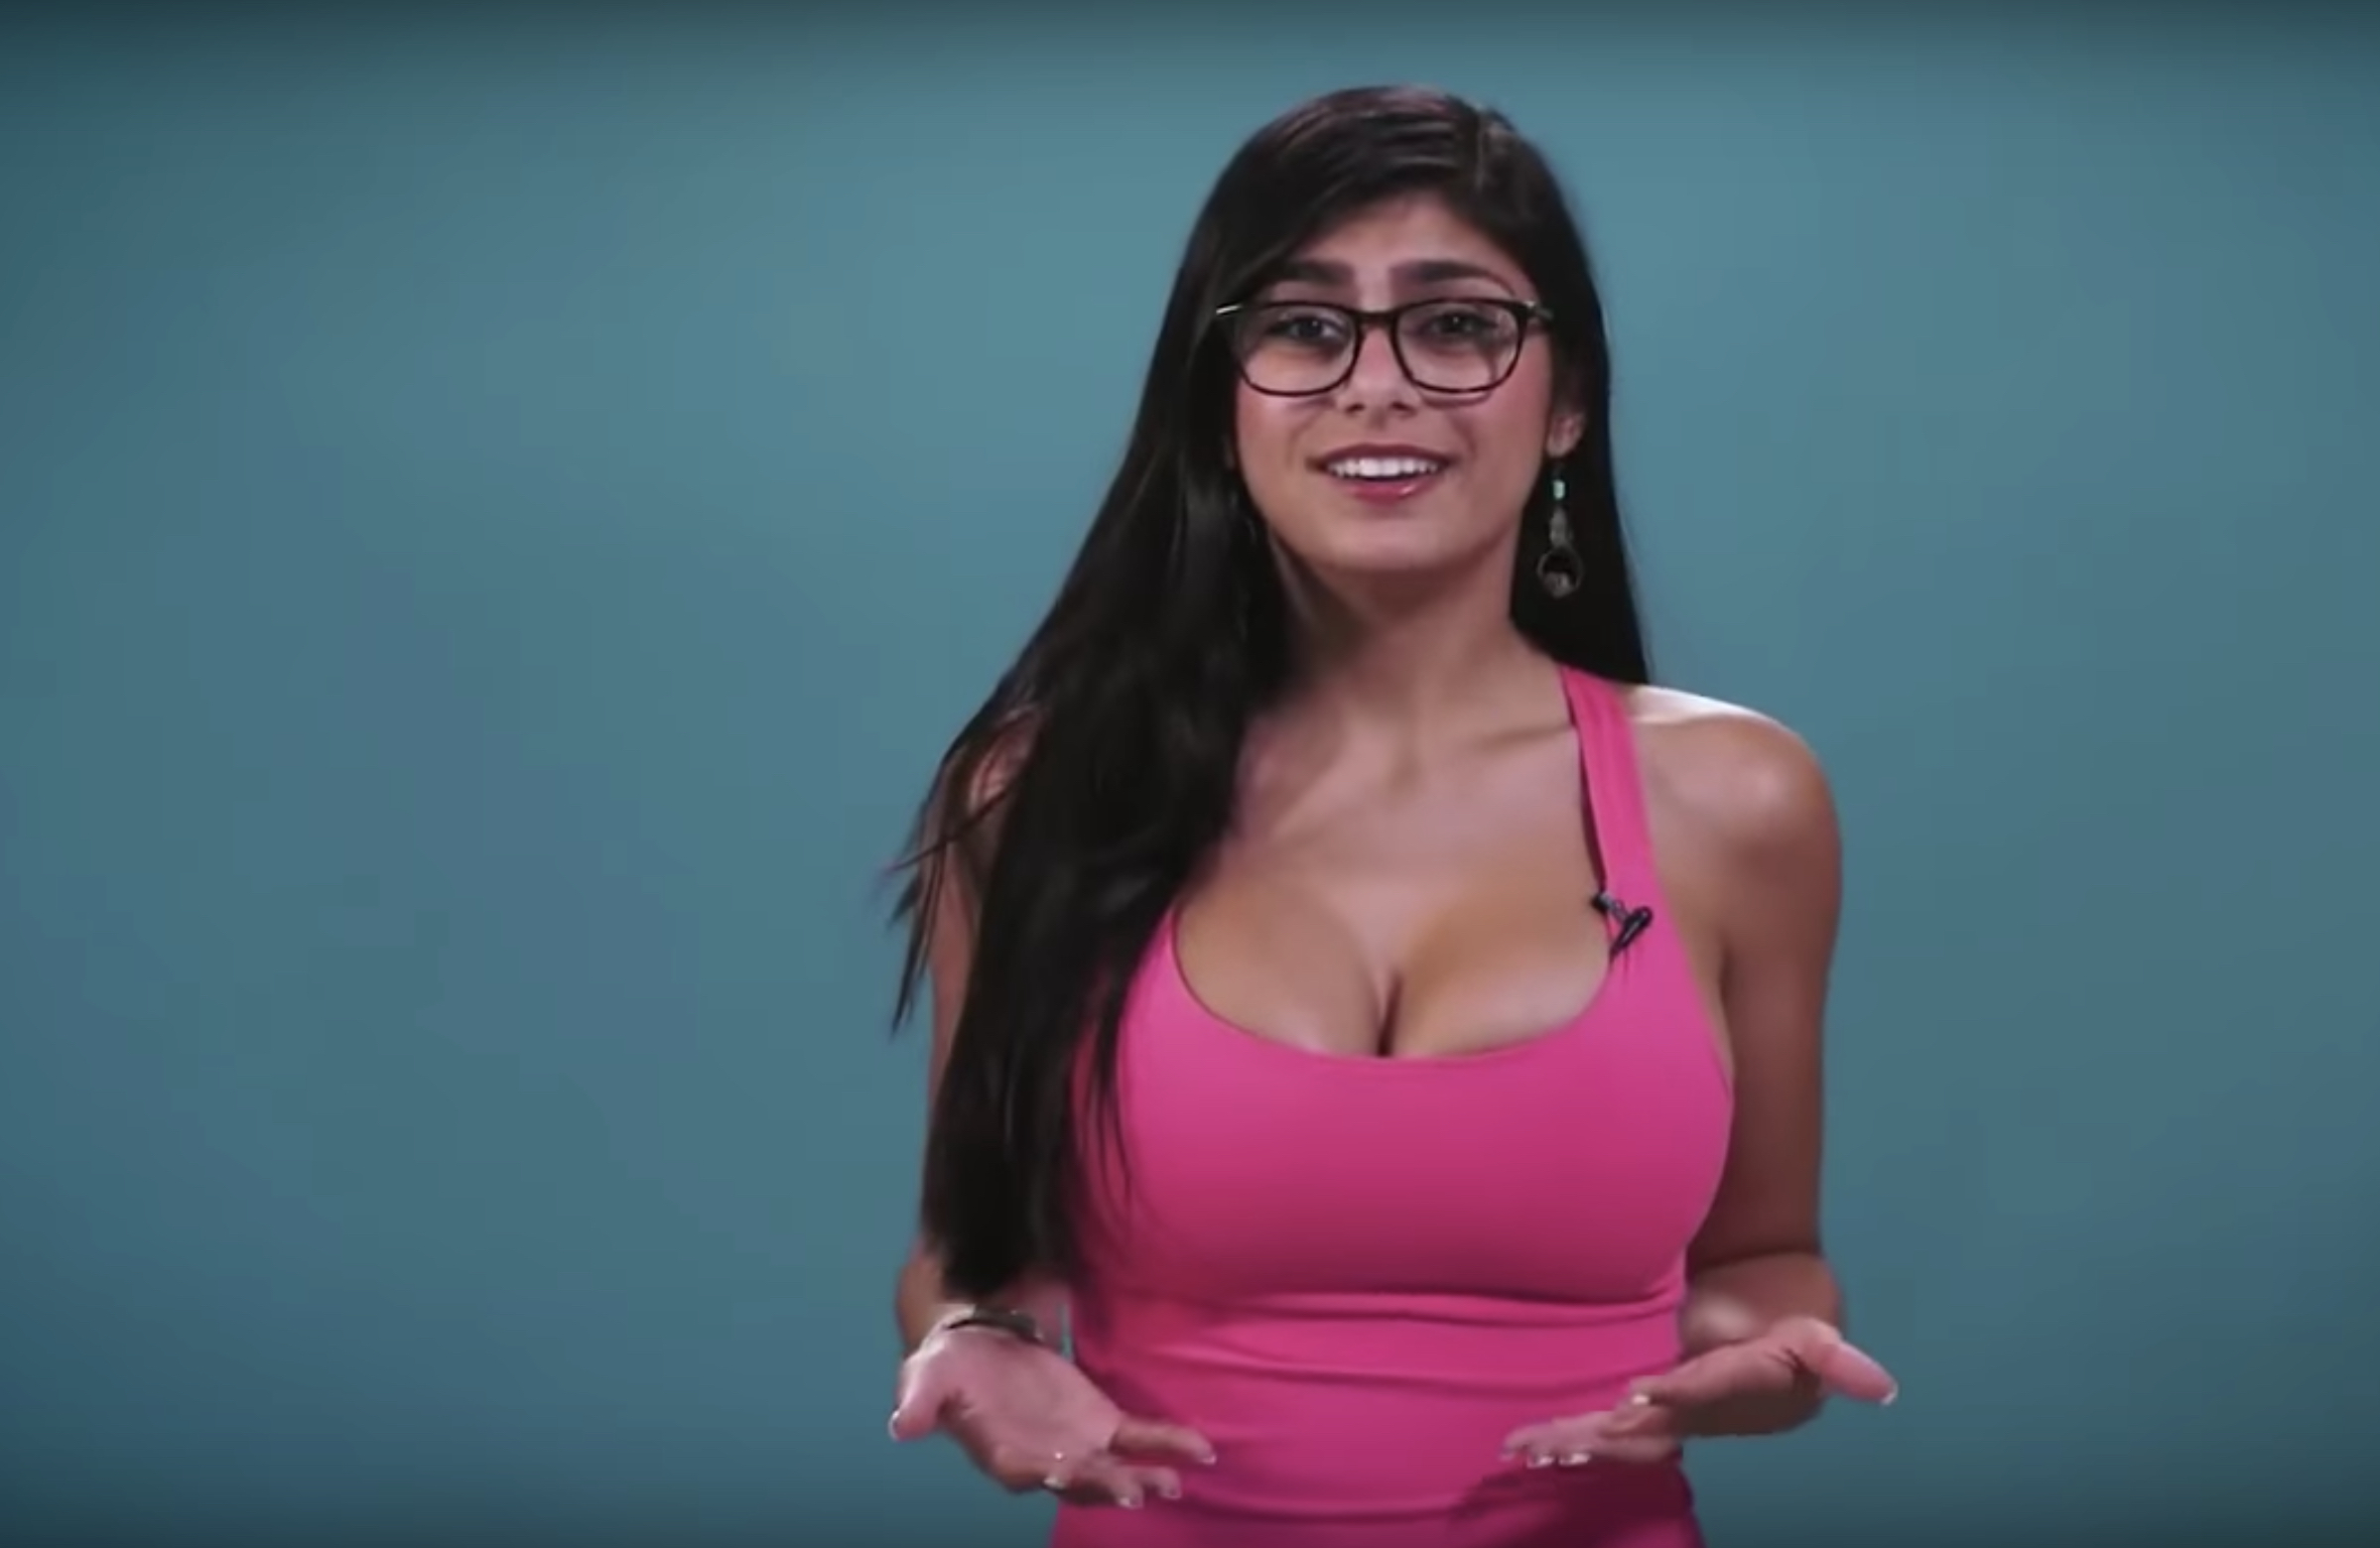 Mia Khalifa Pornhub - Mia Khalifa Gets Real About PornHub Fame, ISIS Threats, And Why She Regrets  Joining The Porn Industry | Thought Catalog